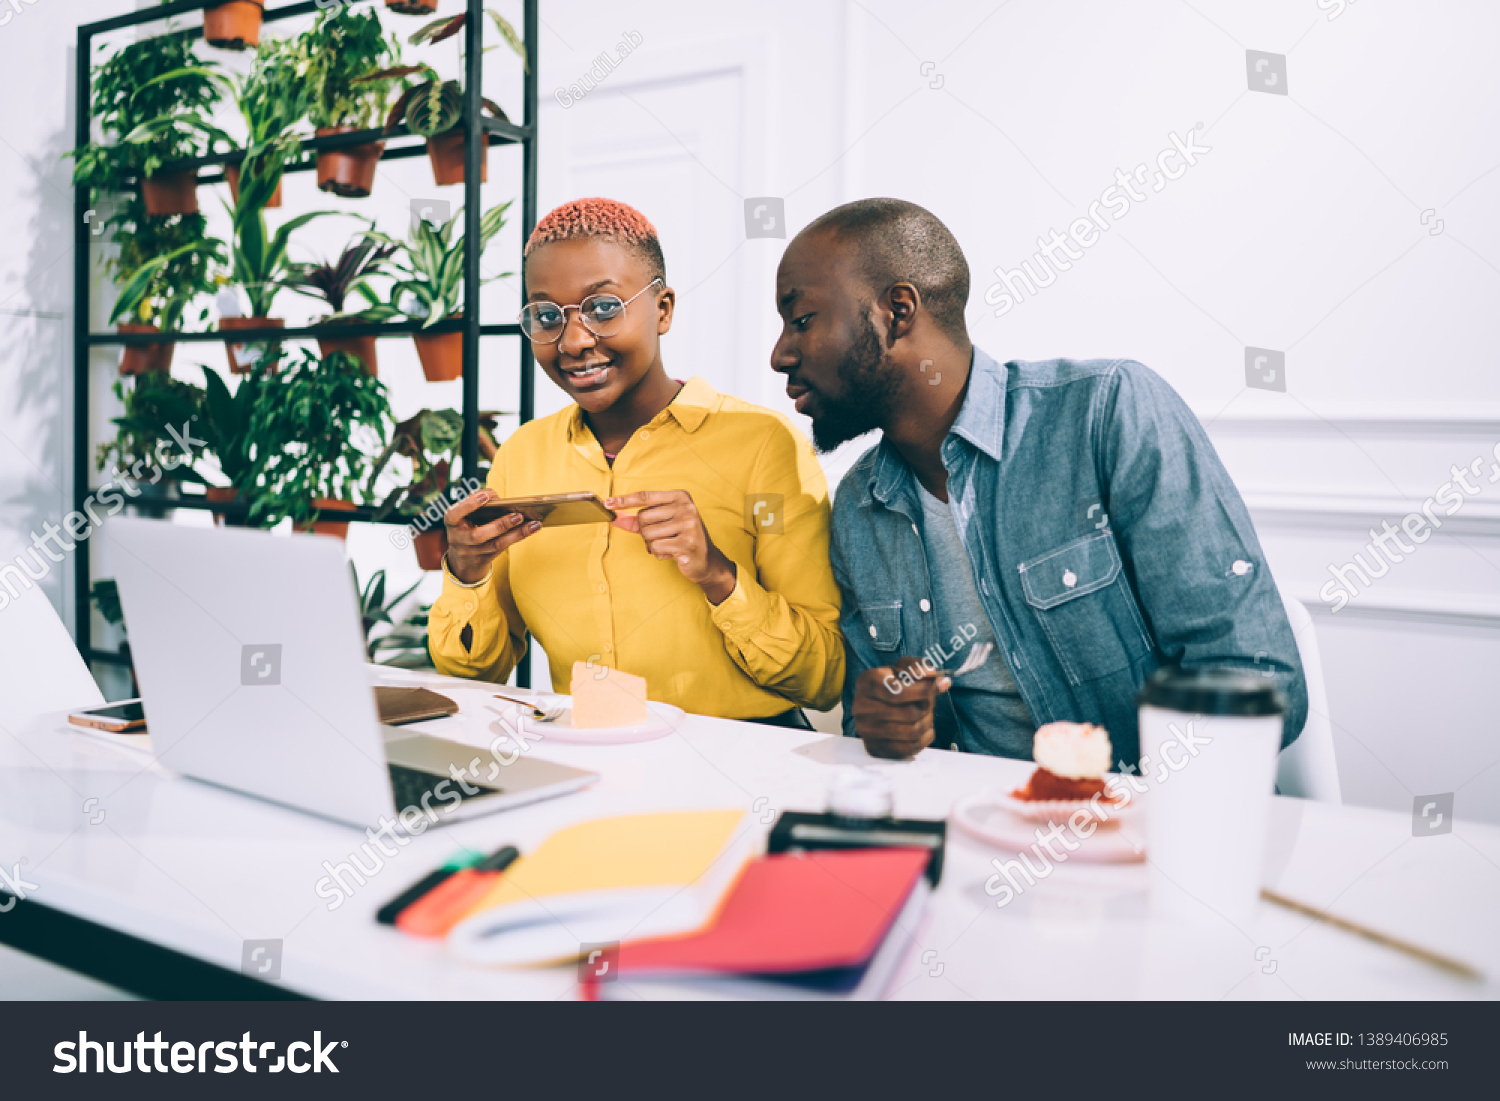 African American guy looking at female colleague taking picture of tasty cafe while eating and working on project in modern cafe together #1389406985